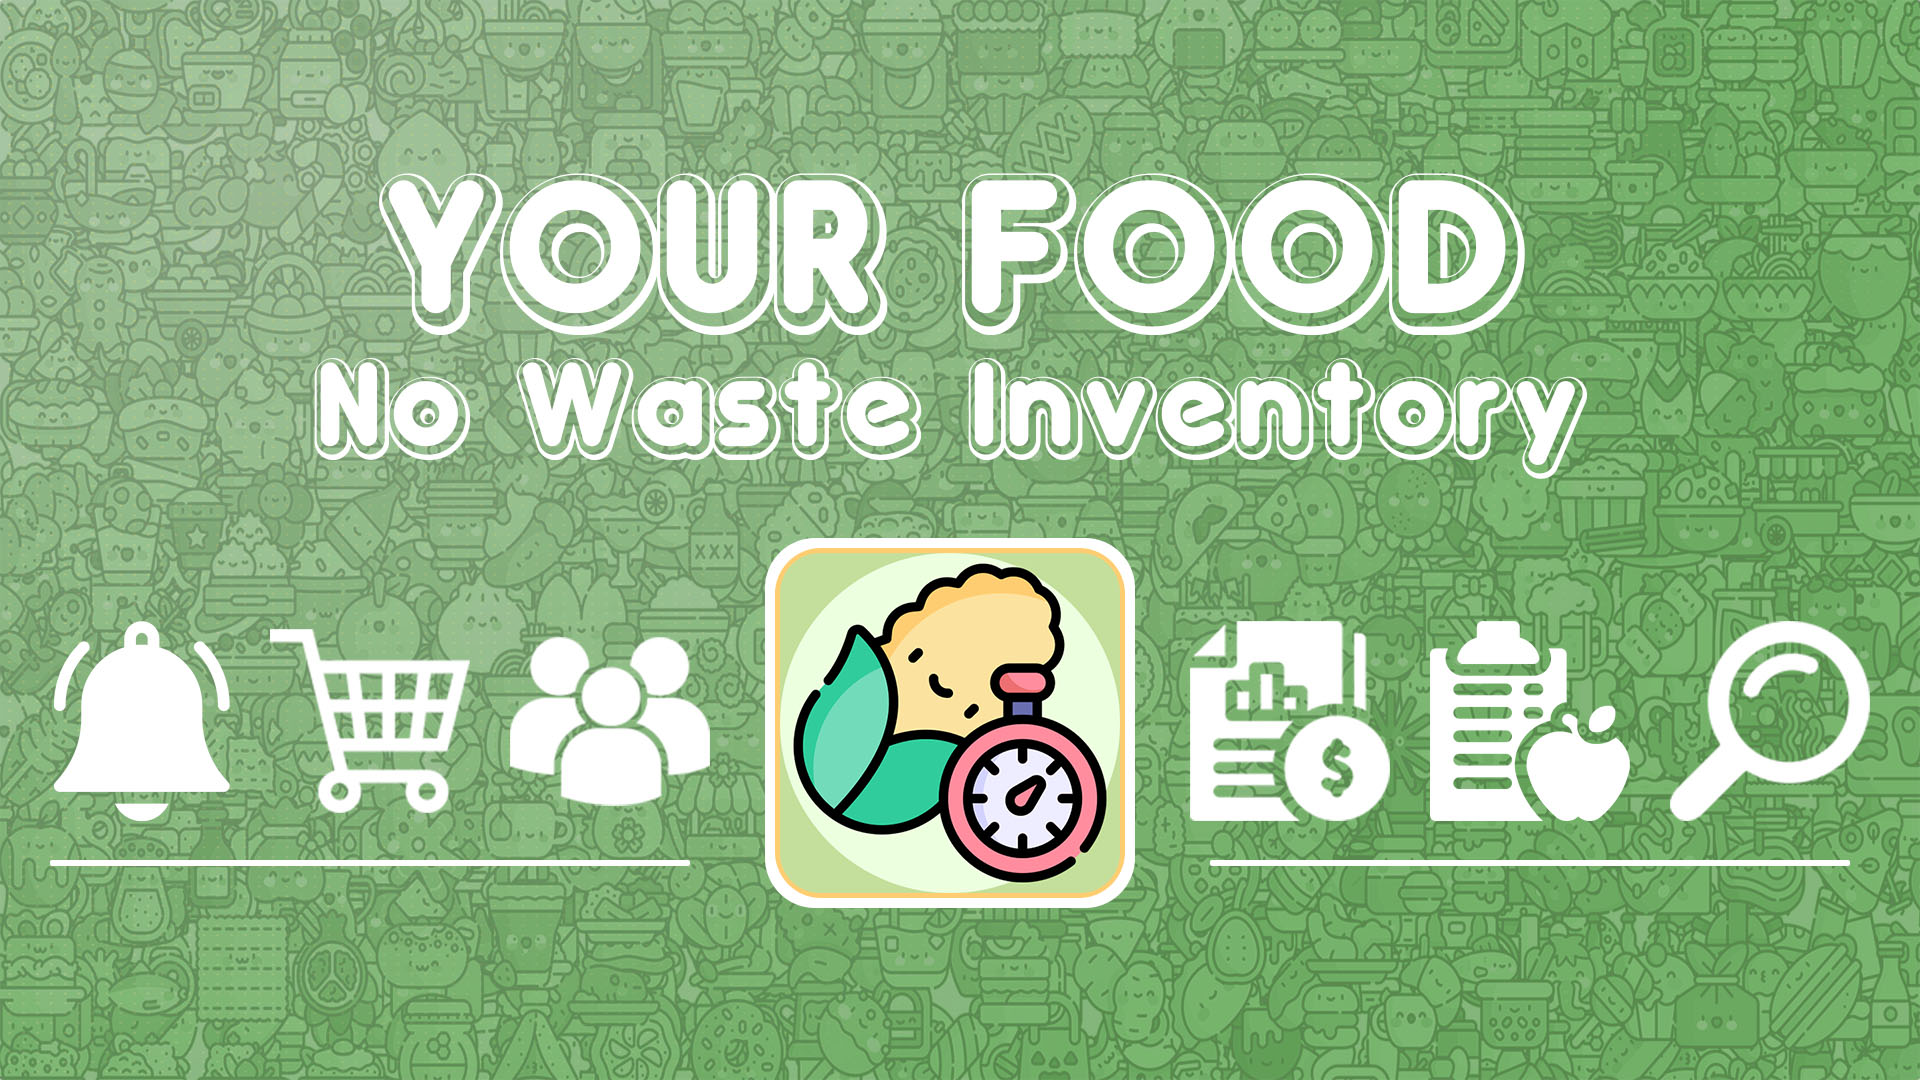 Your Food - No Waste Inventory - 1920 x 1080 Screen 9